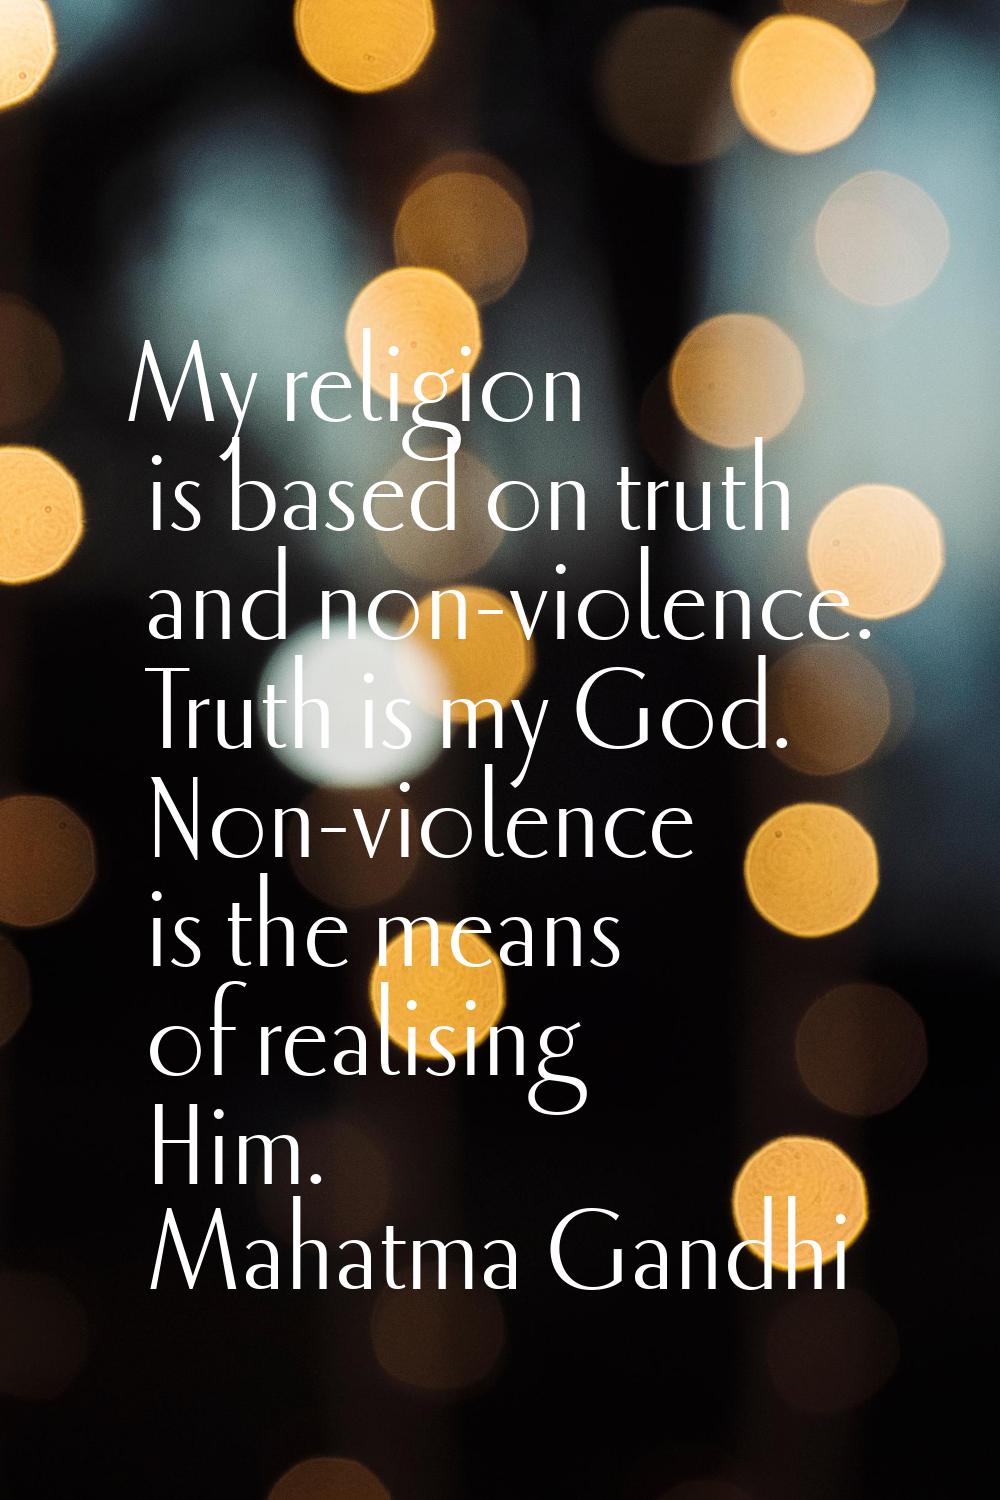 My religion is based on truth and non-violence. Truth is my God. Non-violence is the means of reali